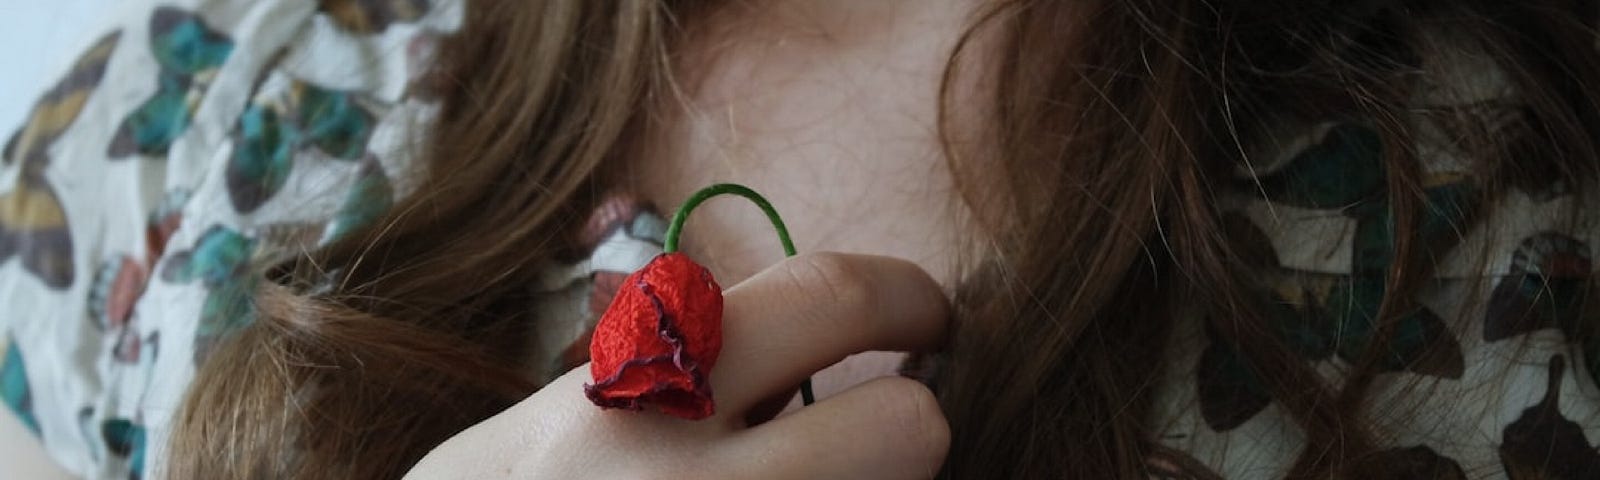 A woman holding a wilted poppy in front of her chest.